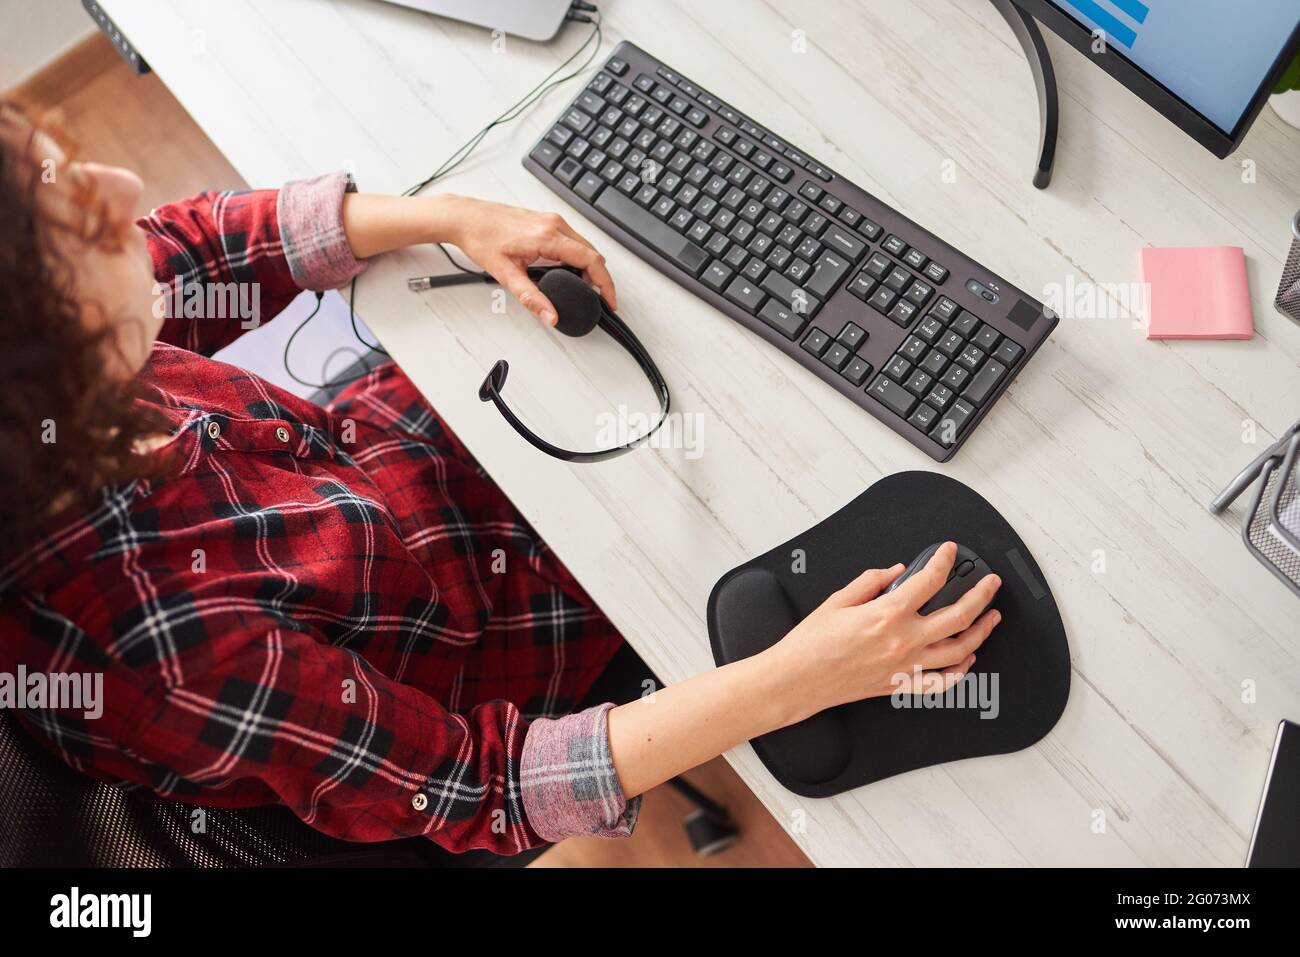 Top view of a woman's hands using the computer mouse and holding a headset Stock Photo